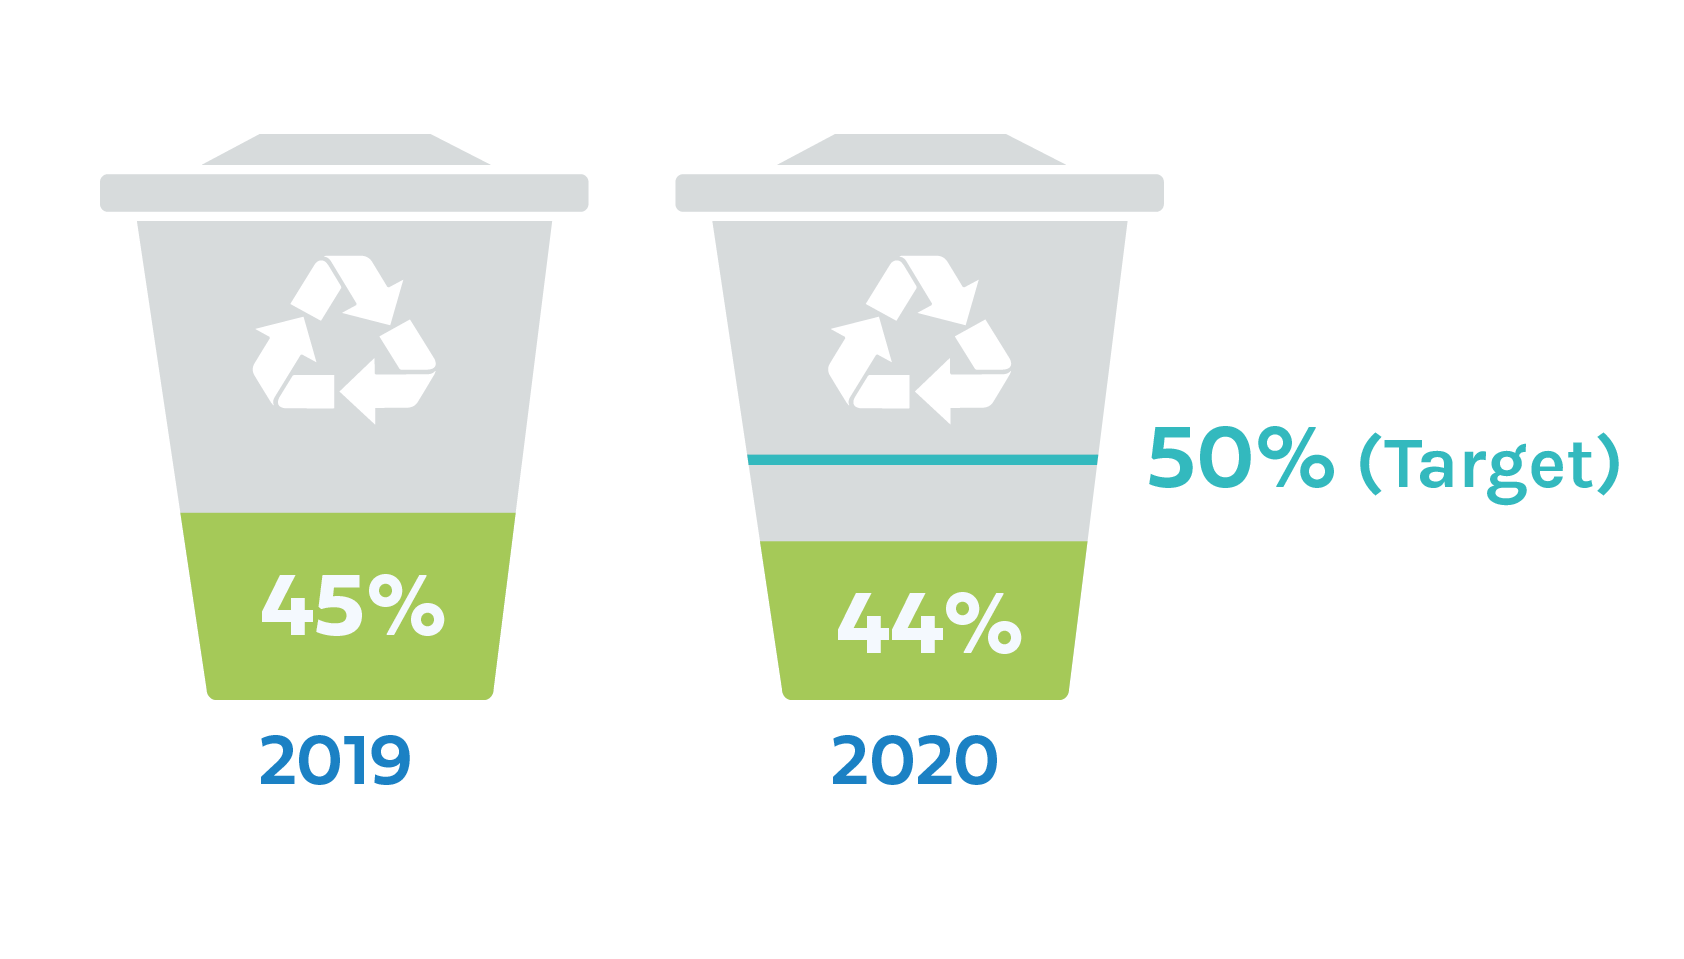 Infographic: Britain's recycling rate in 2019 (45%) vs 2020 (44% - with a 50% target)